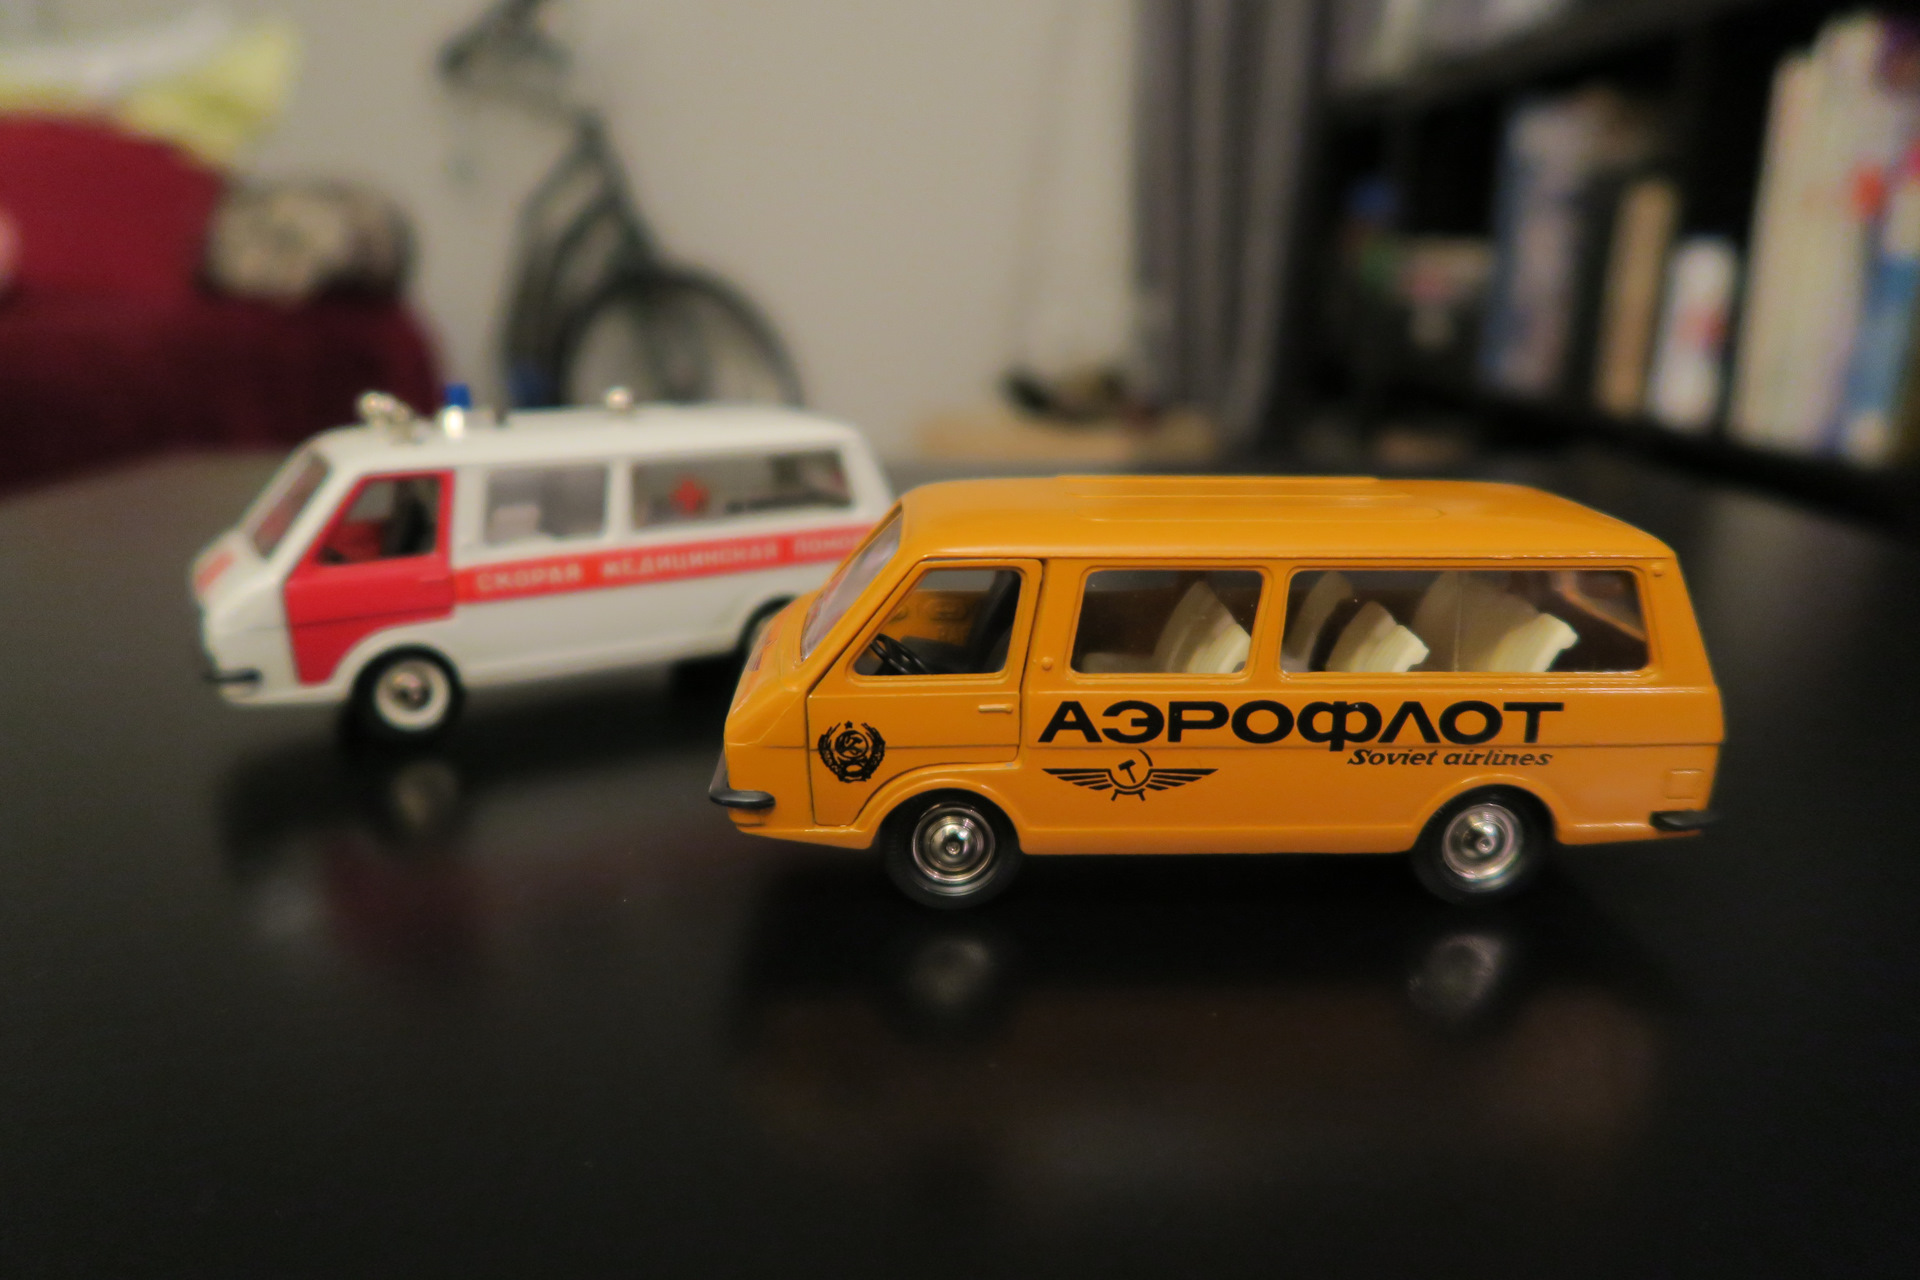 Мод раф. РАФ тампо 1:43. Ford Transit 1:43. РАФ 2203 Прага 1:43. РАФ ралли 1:43.